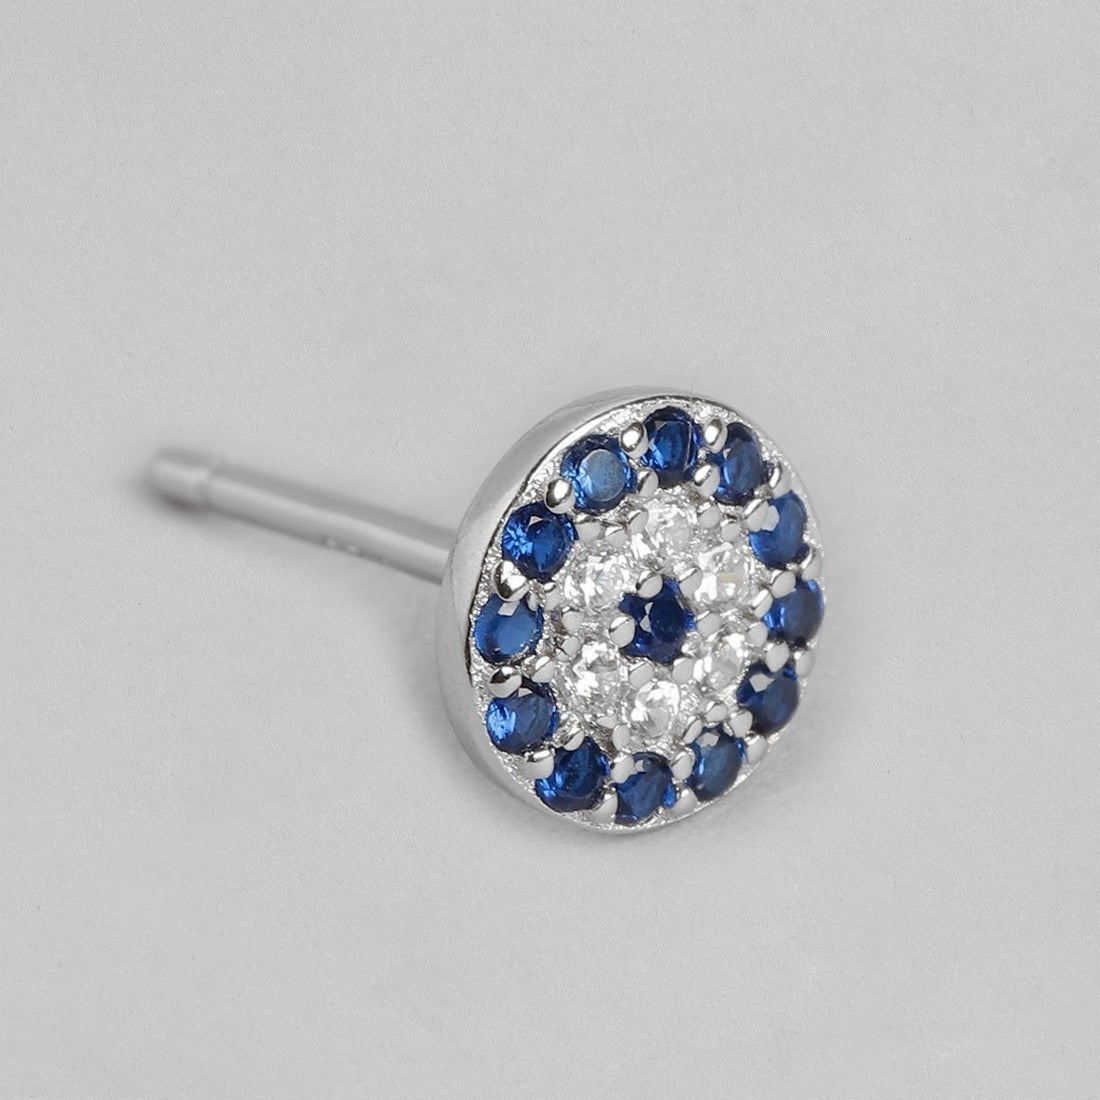 Blue-CZ Studded Rhodium Plated 925 Sterling Silver Earrings